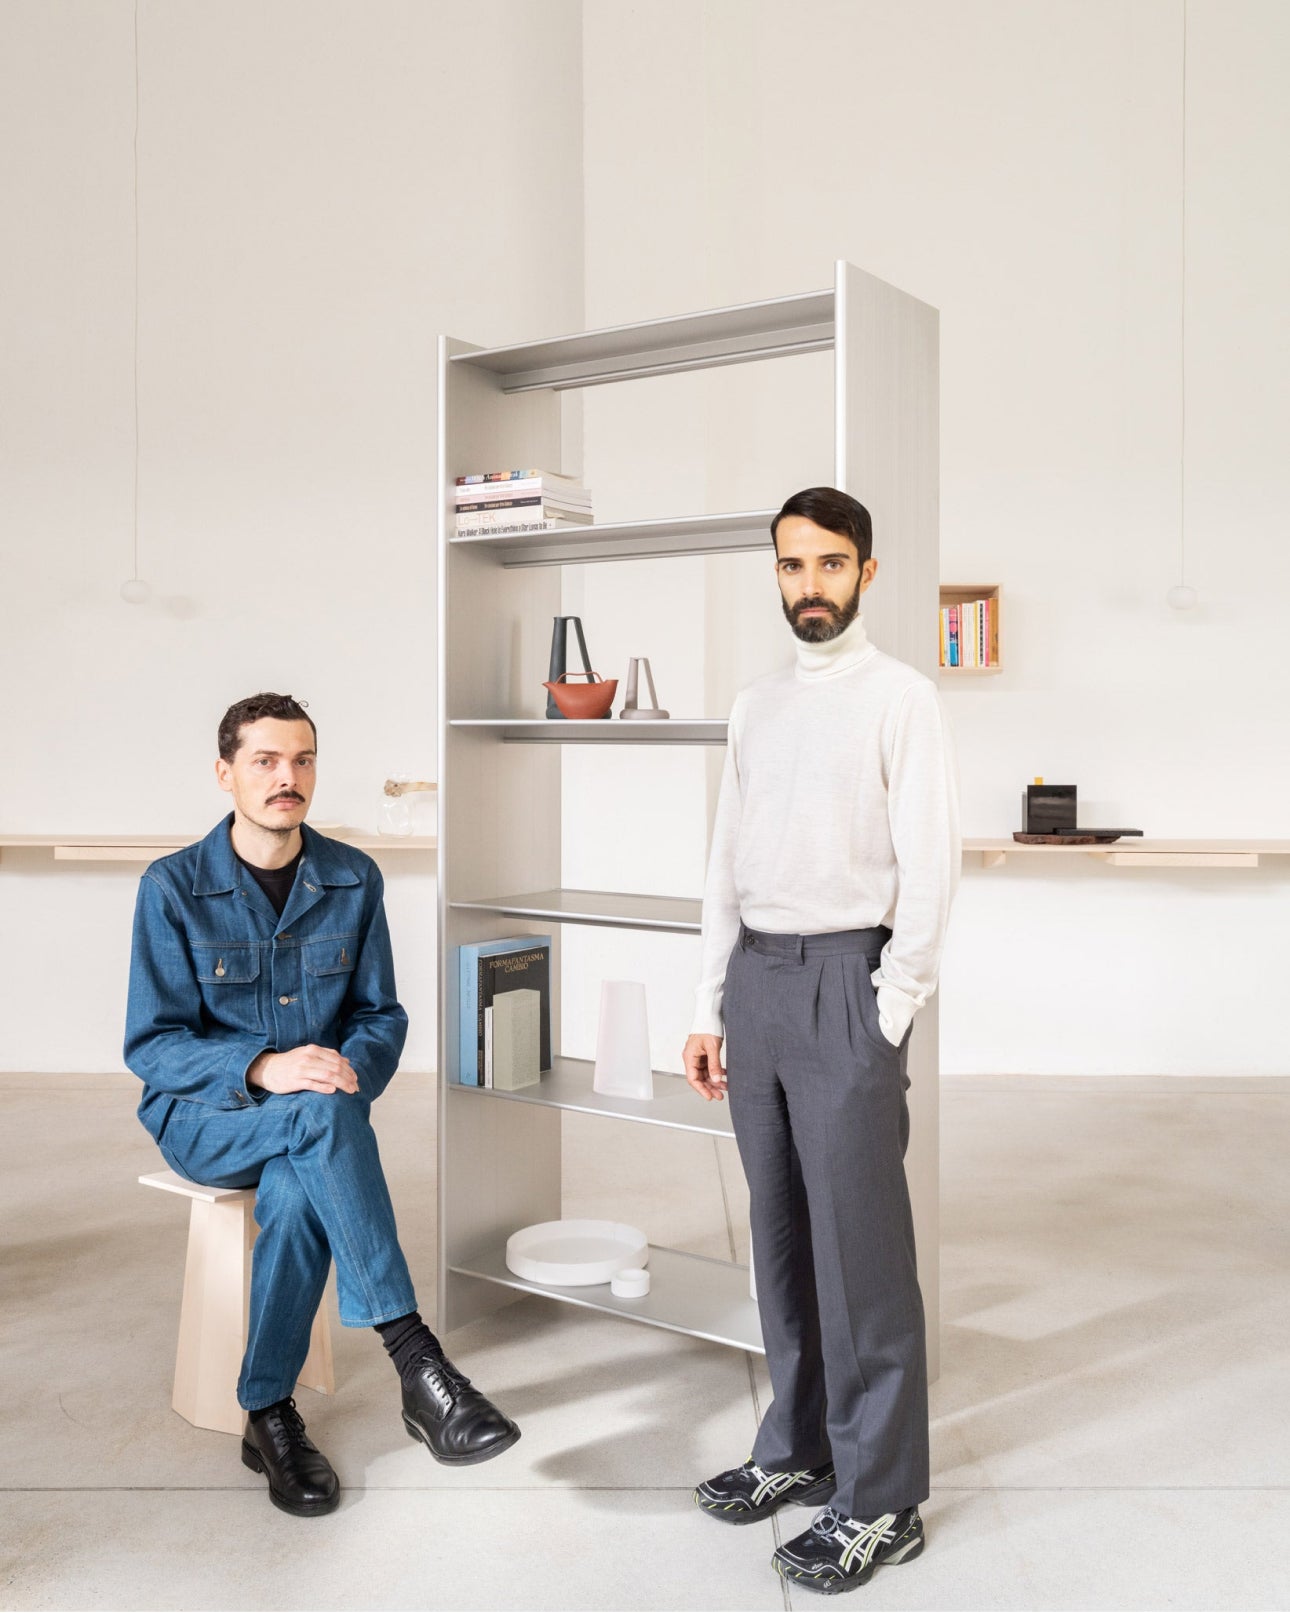 An image of Formafantasma, the designers of the T Shelf, with a T Shelf High 100 in the background.